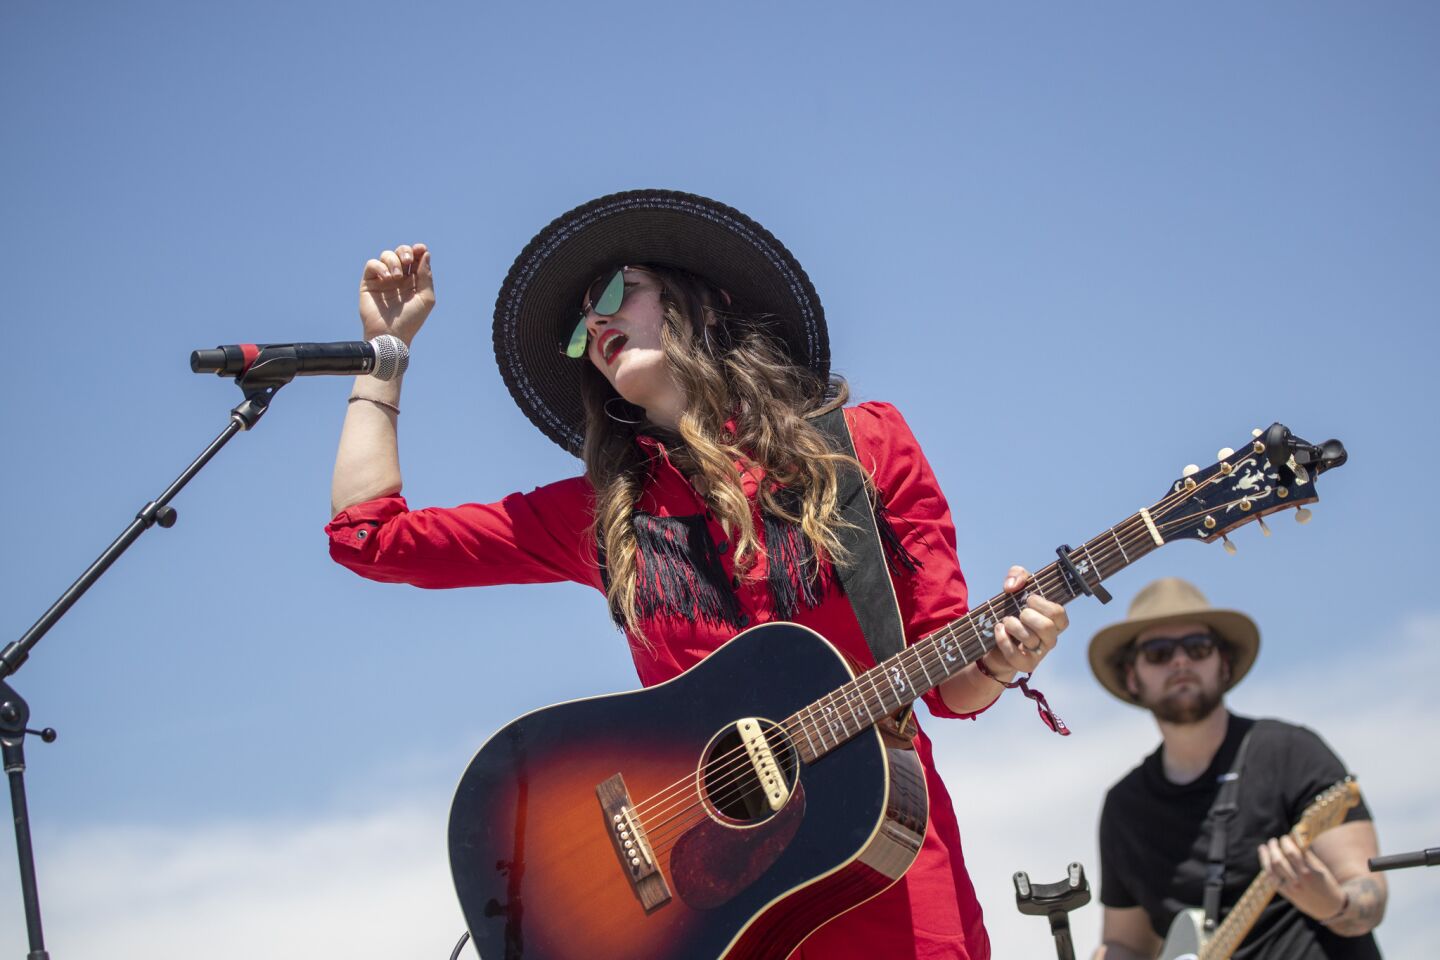 Dawn Landes performs on the Sirius XM Spotlight Stage on the second of the three-day 2019 Stagecoach Country Music Festival.